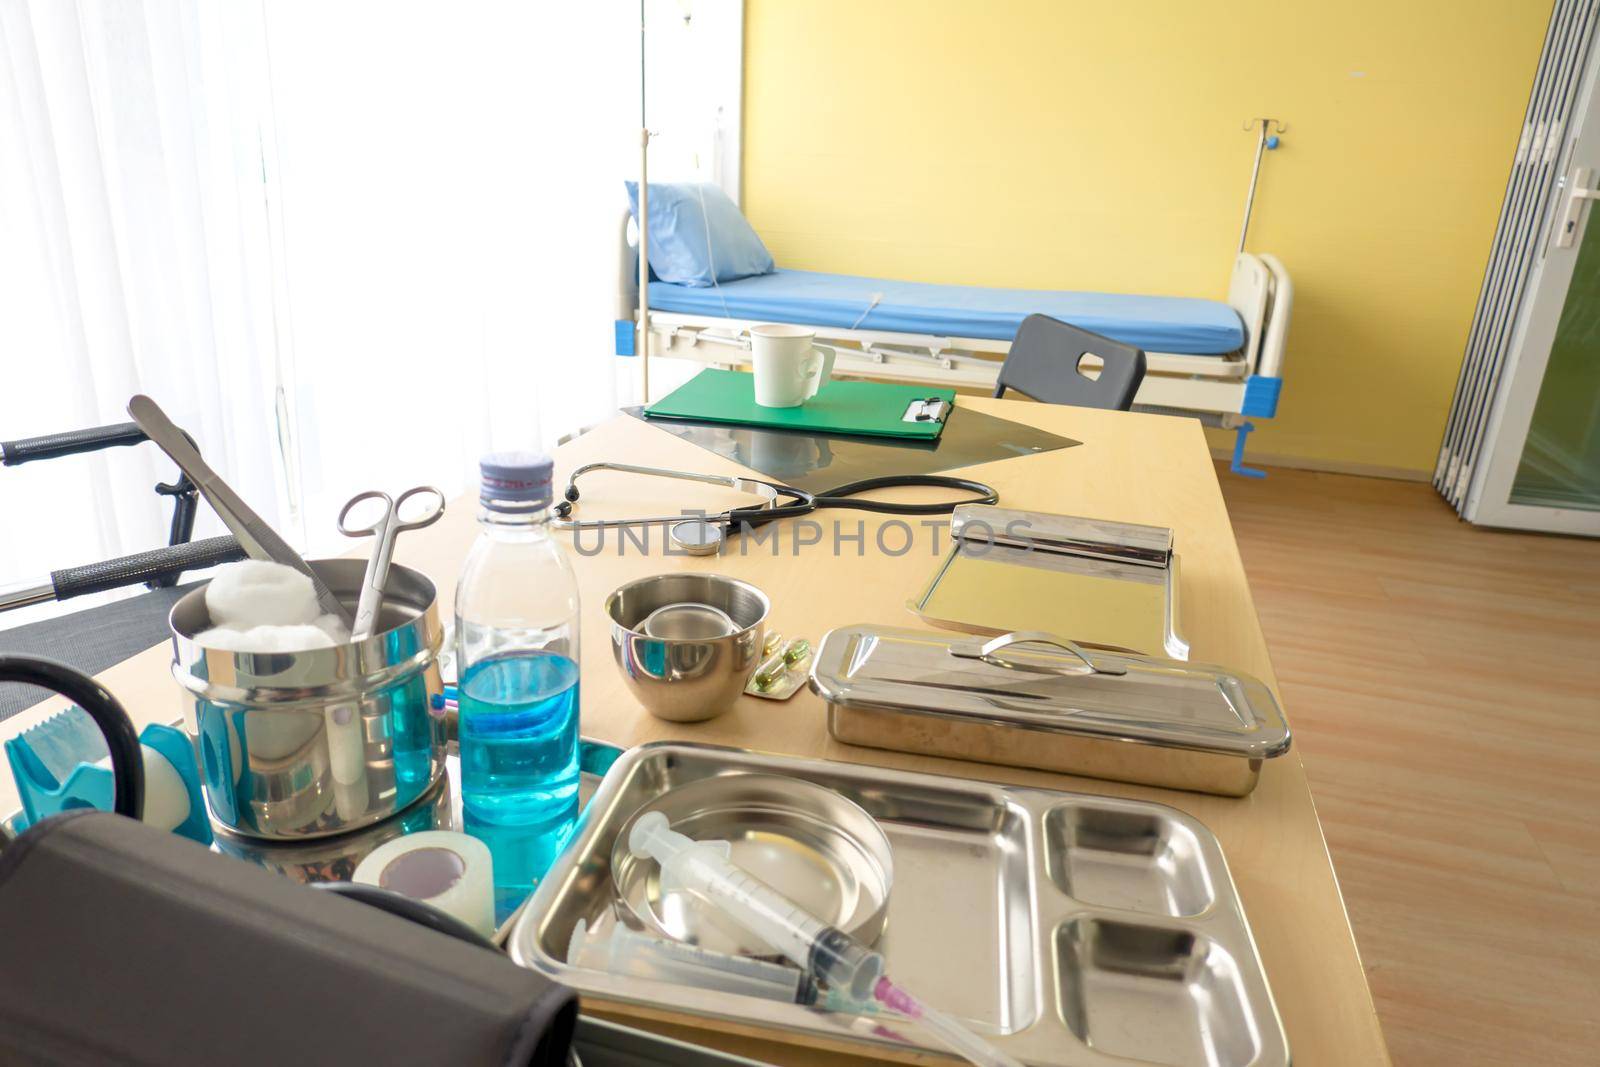 Patient bed in hospital ward with no body